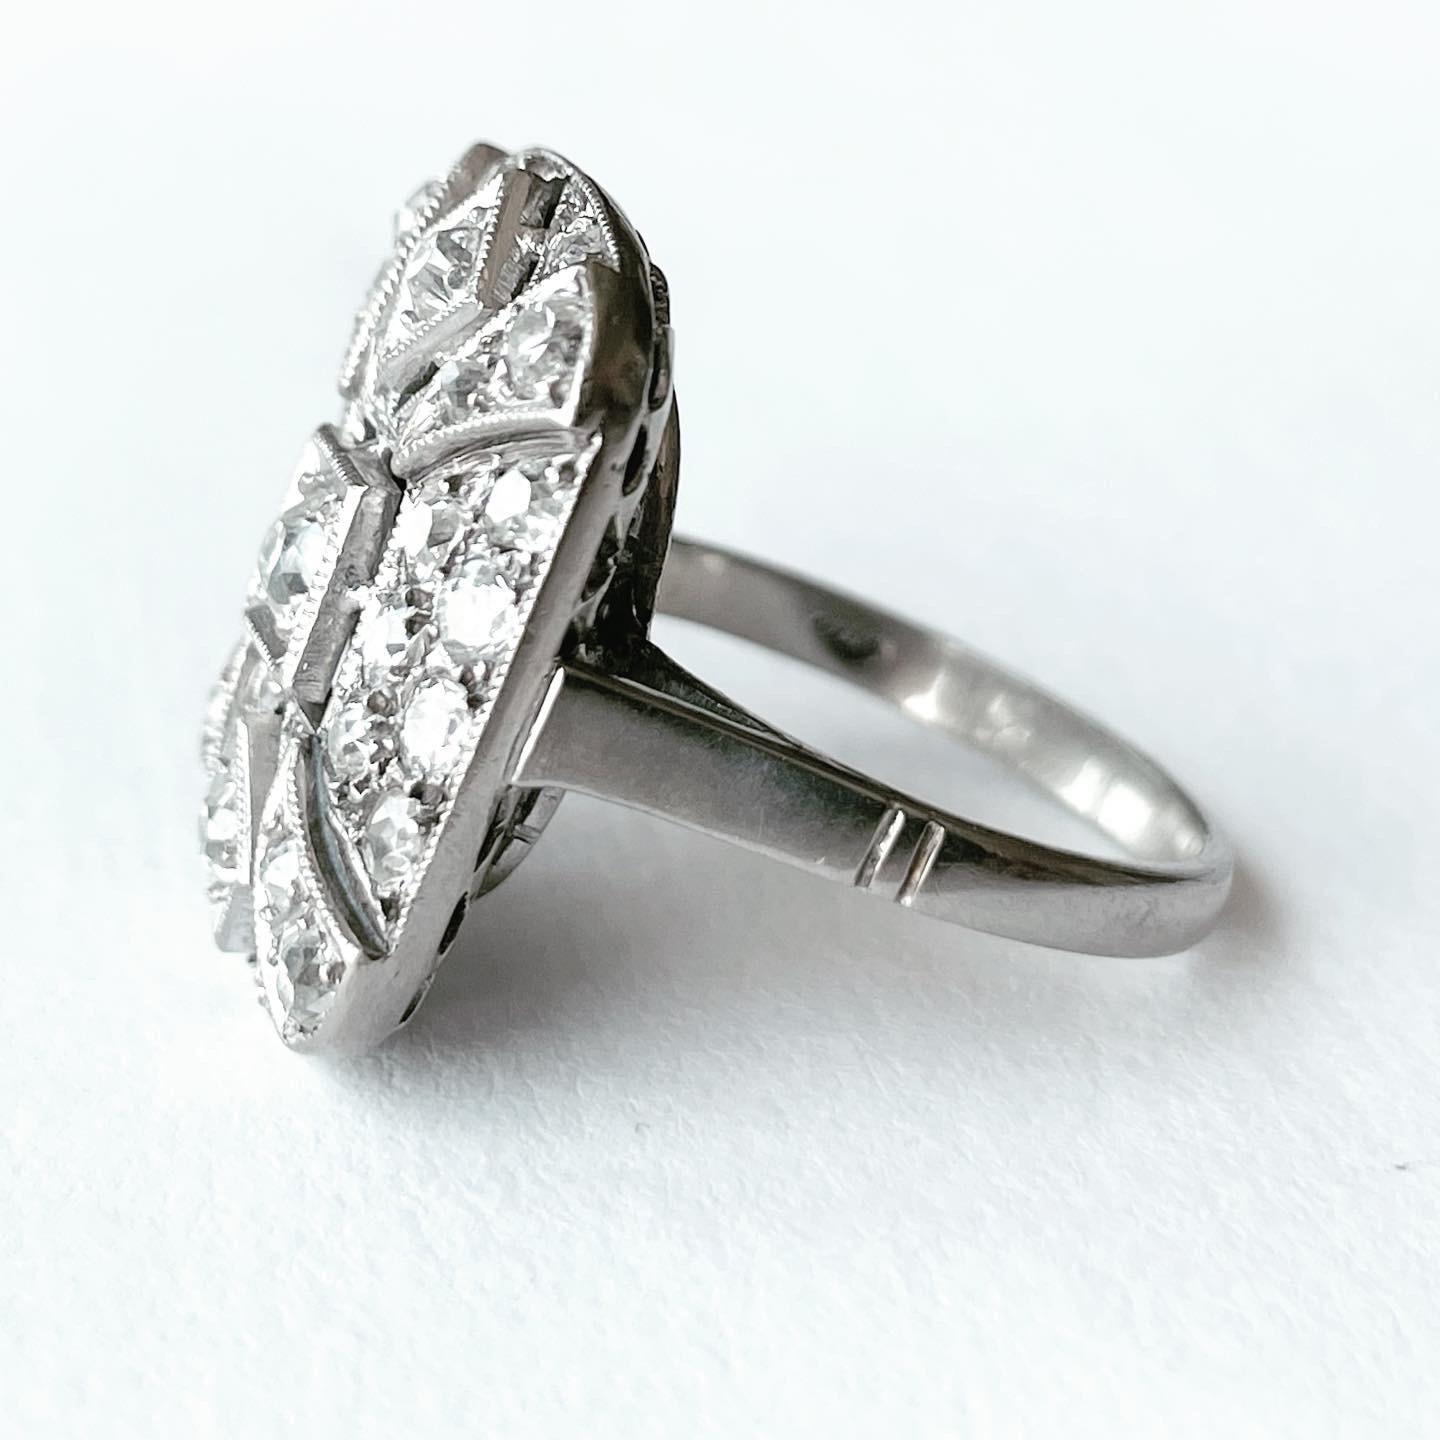 Unique and exquisite Art Decó platinum and diamond bridal fashion ring.
1930s diamond three stones ring crafted in platinum, This piece features old European Cut diamonds.
A gorgeous design, it could make a unique engagement ring, or a special